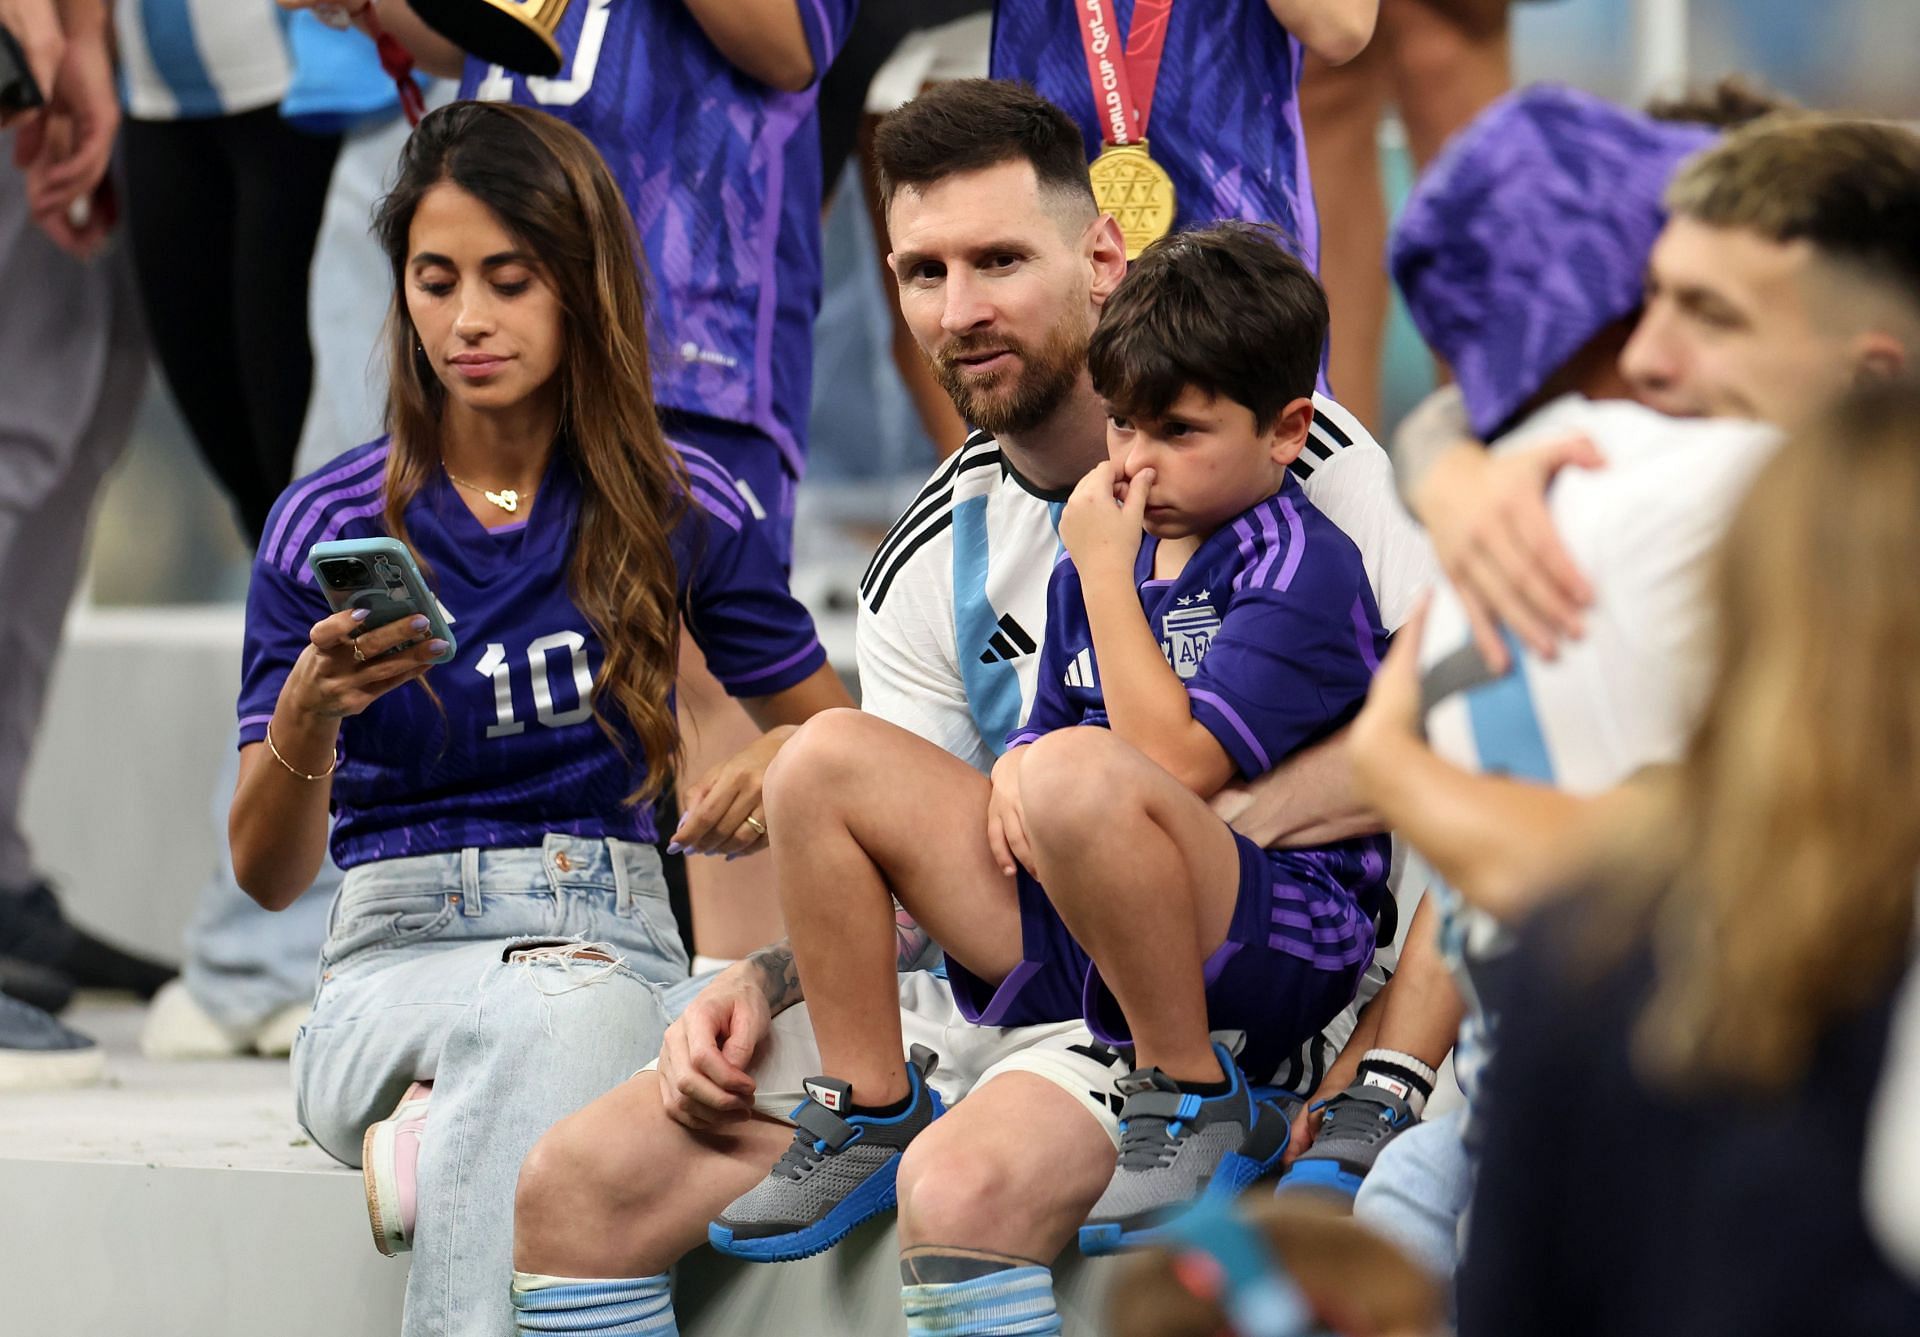 The Lionel Messi family were delighted with the World Cup triumph.